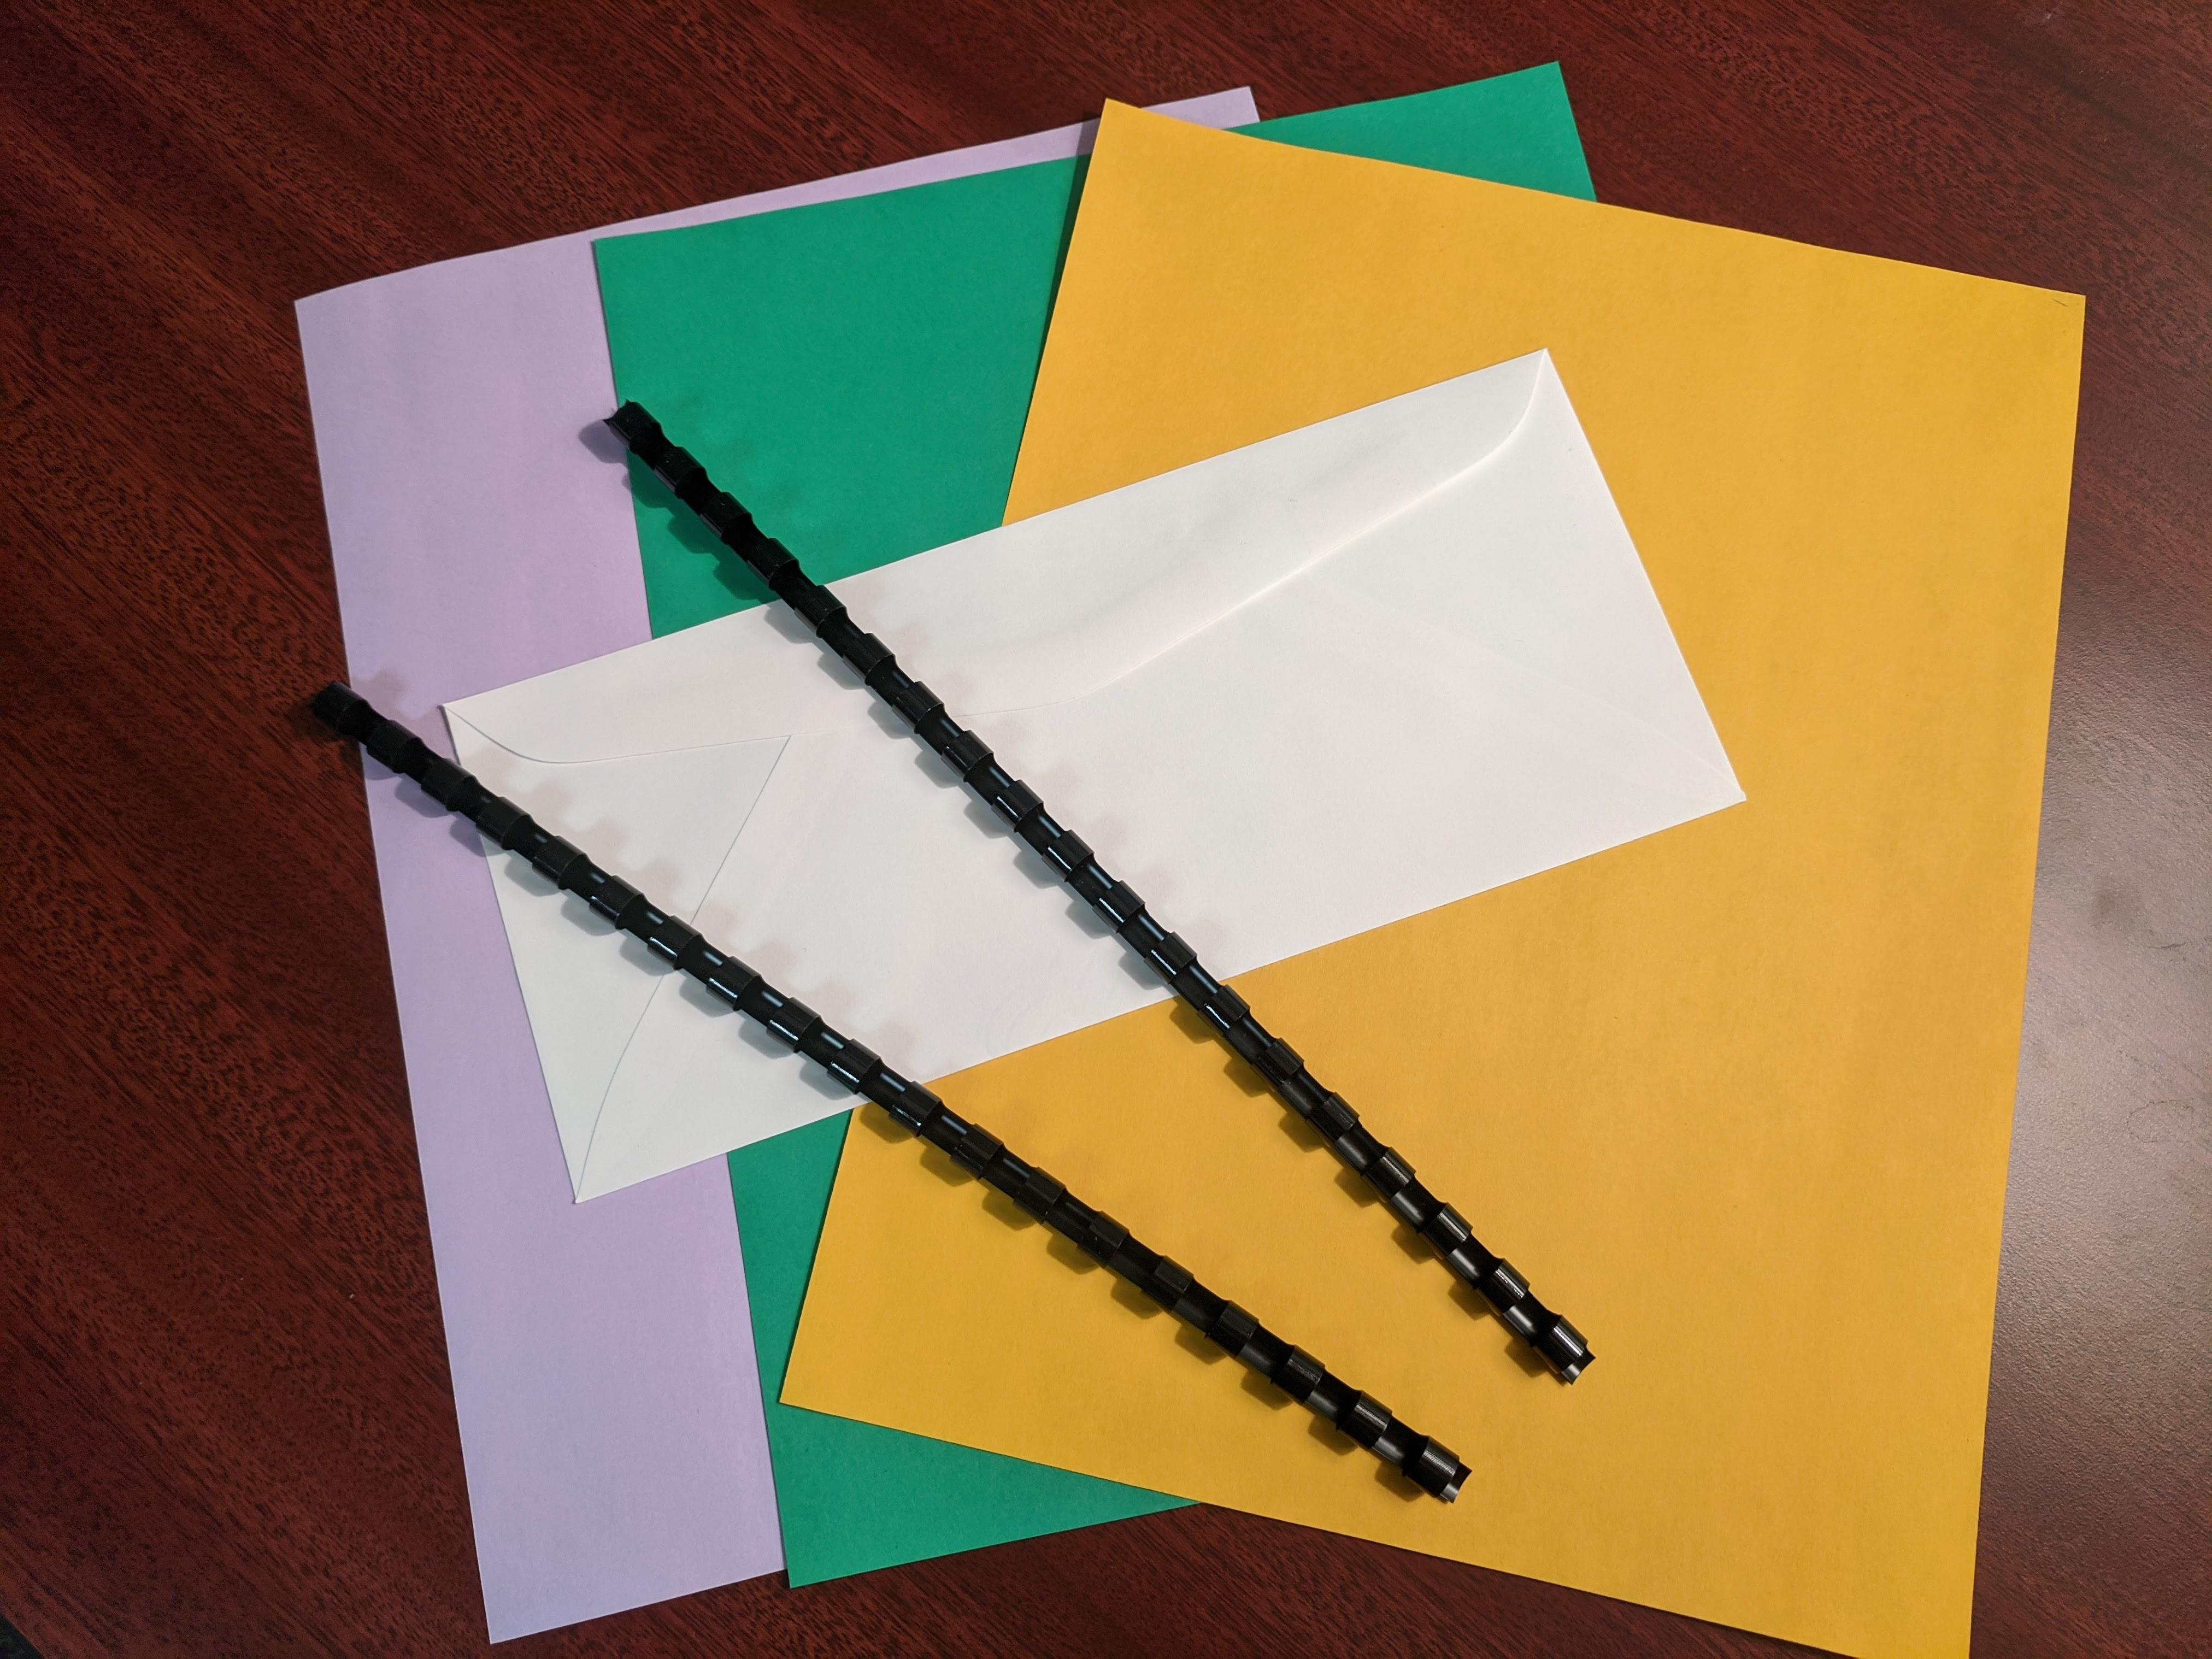 Sheets of colored paper, a blank envelope, and plastic combs used for binding pages